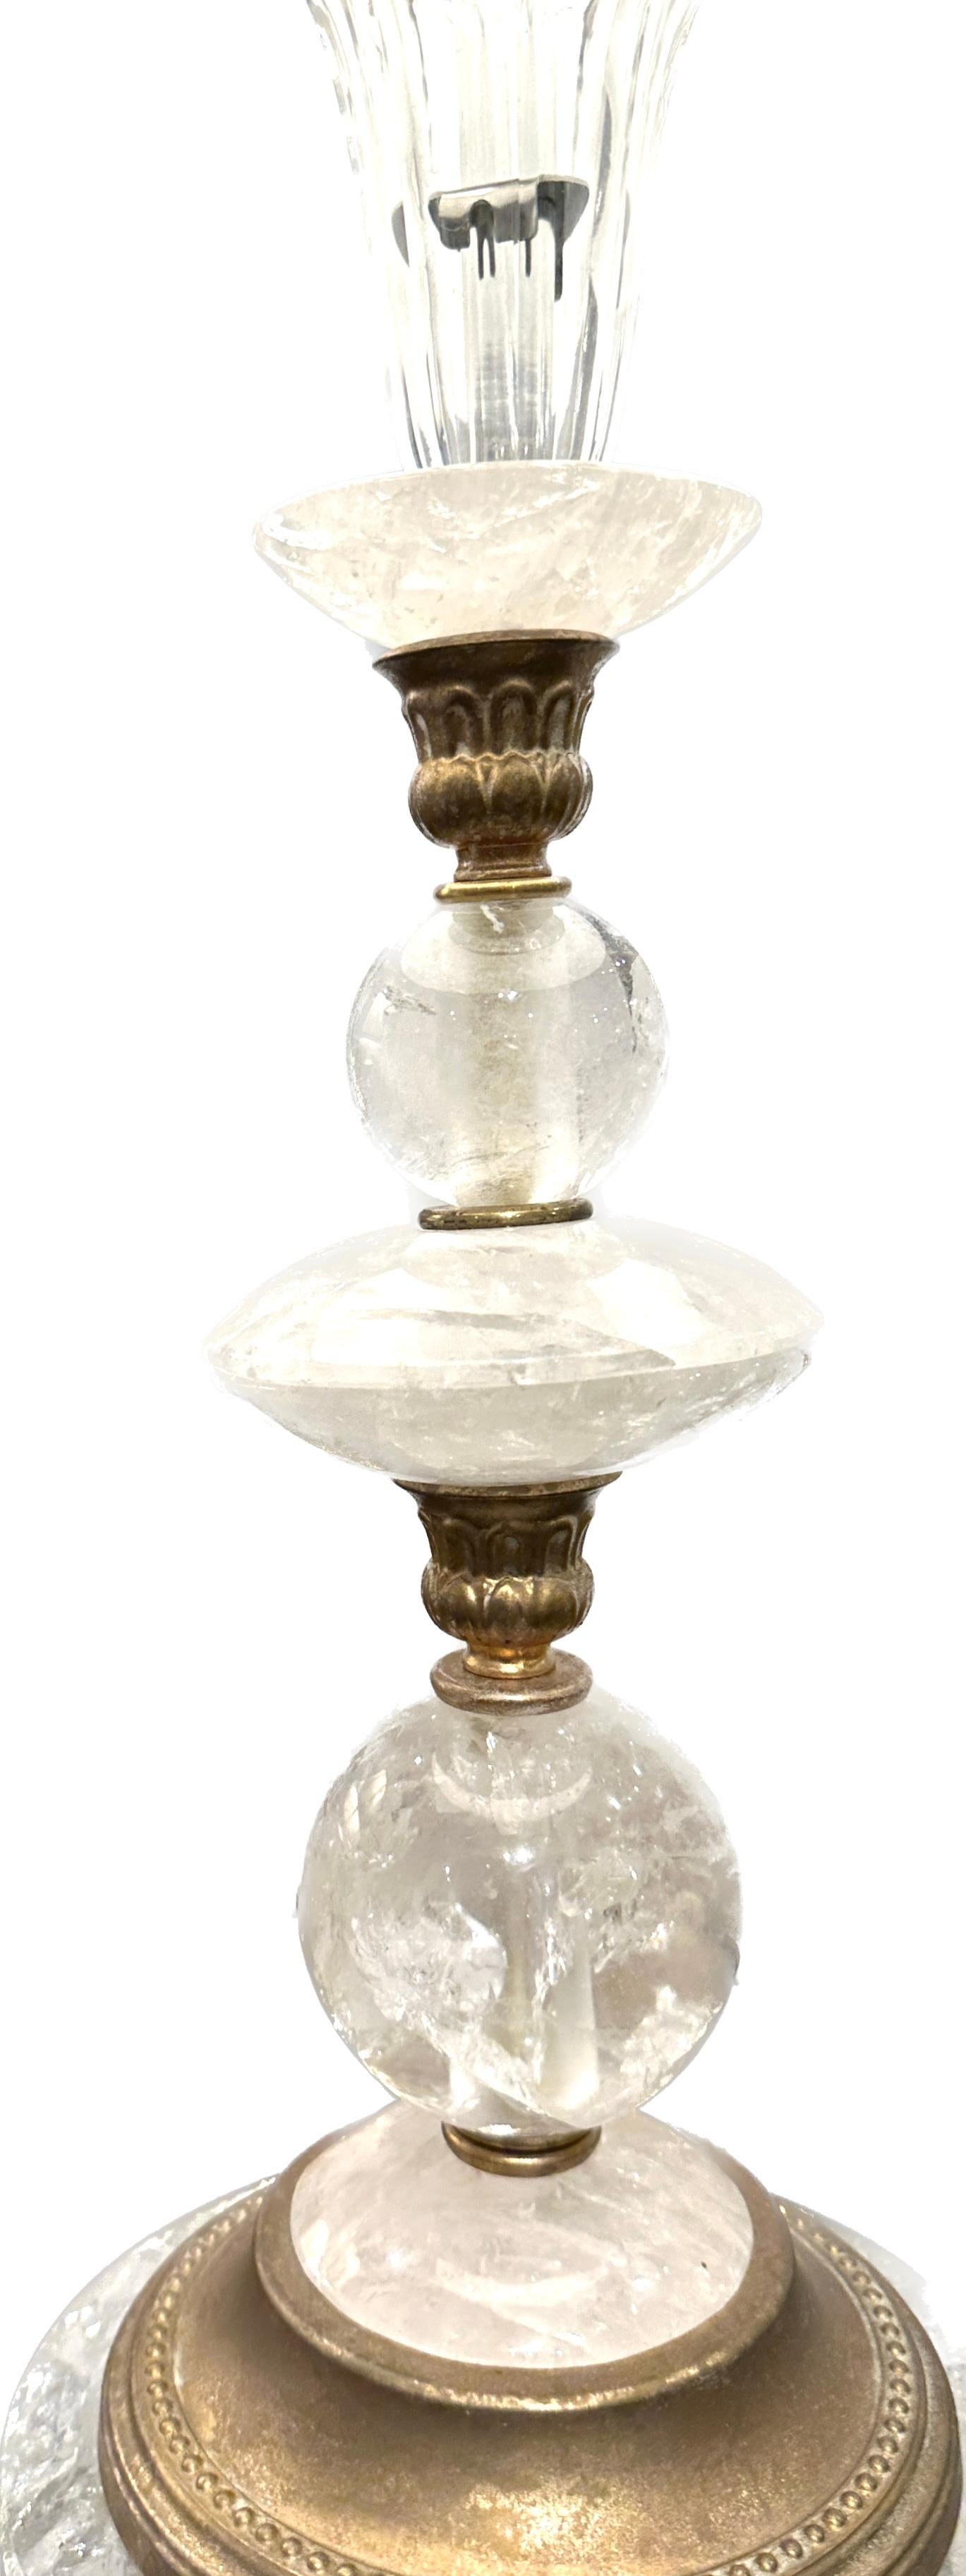 Vintage rock Crystal table lamp with round gilt base, spaced between with gilt metal decorative accent trims.  Finished with rock Crystal finial.
17”  to the rock Crystal.  Shade not included.